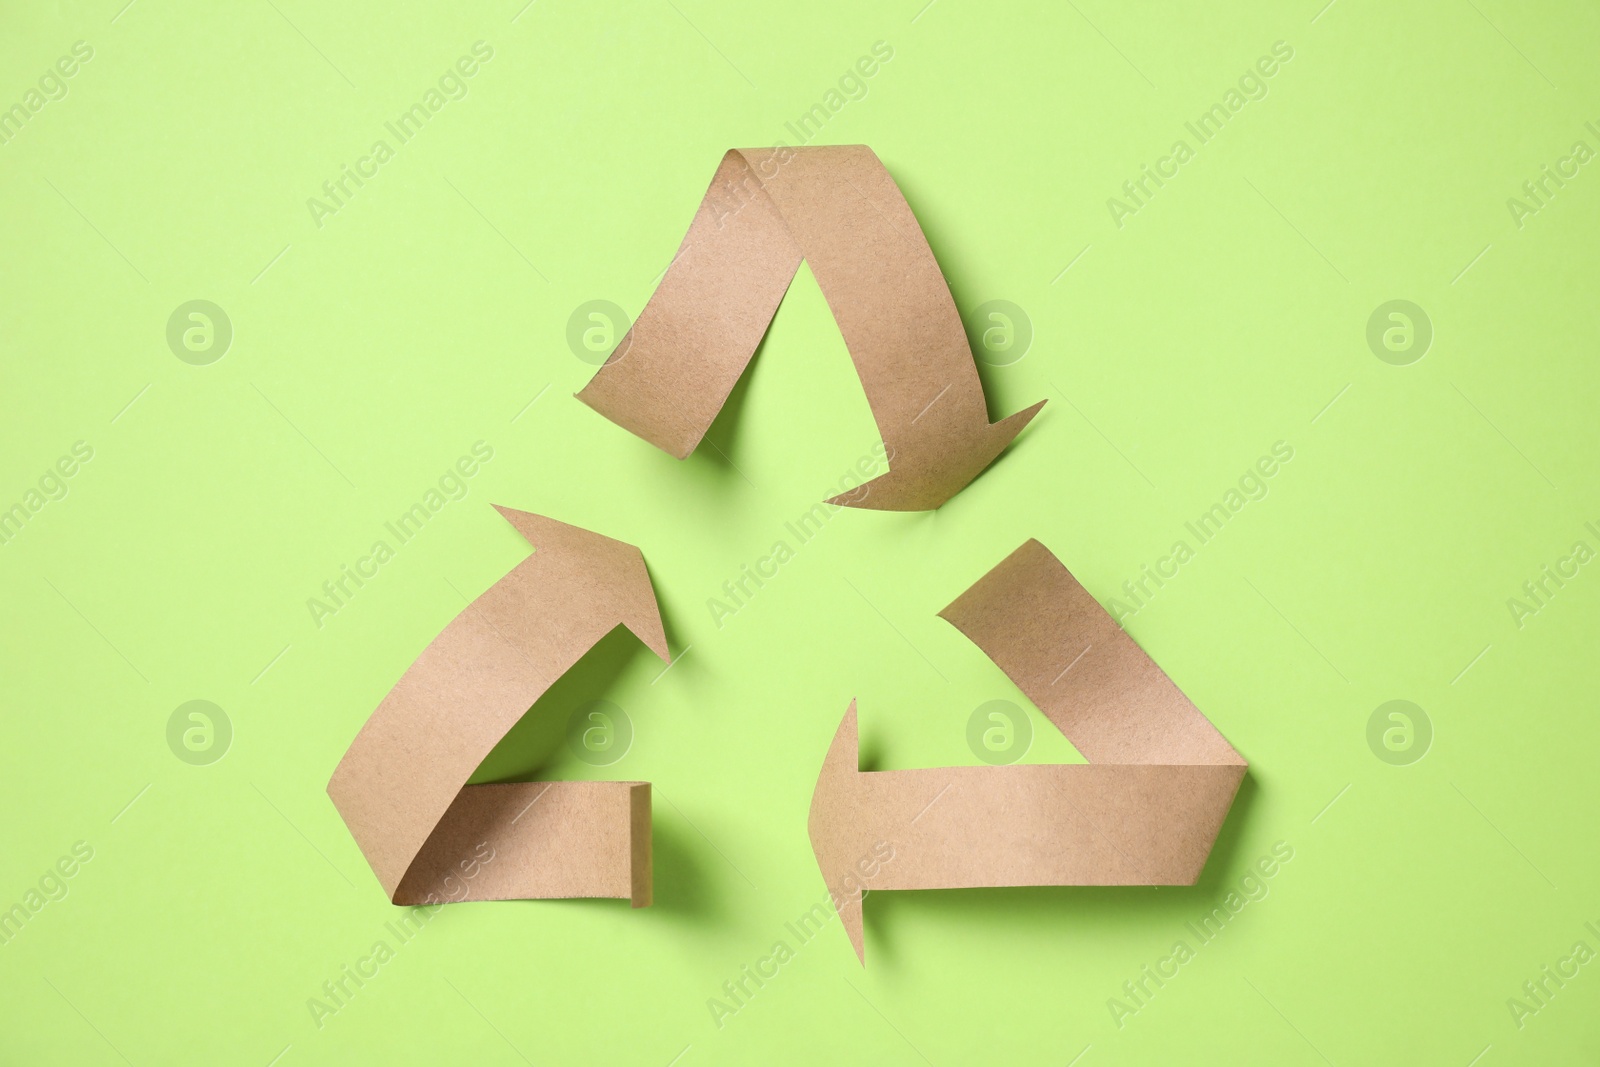 Photo of Recycling symbol cut out of paper on green background, top view